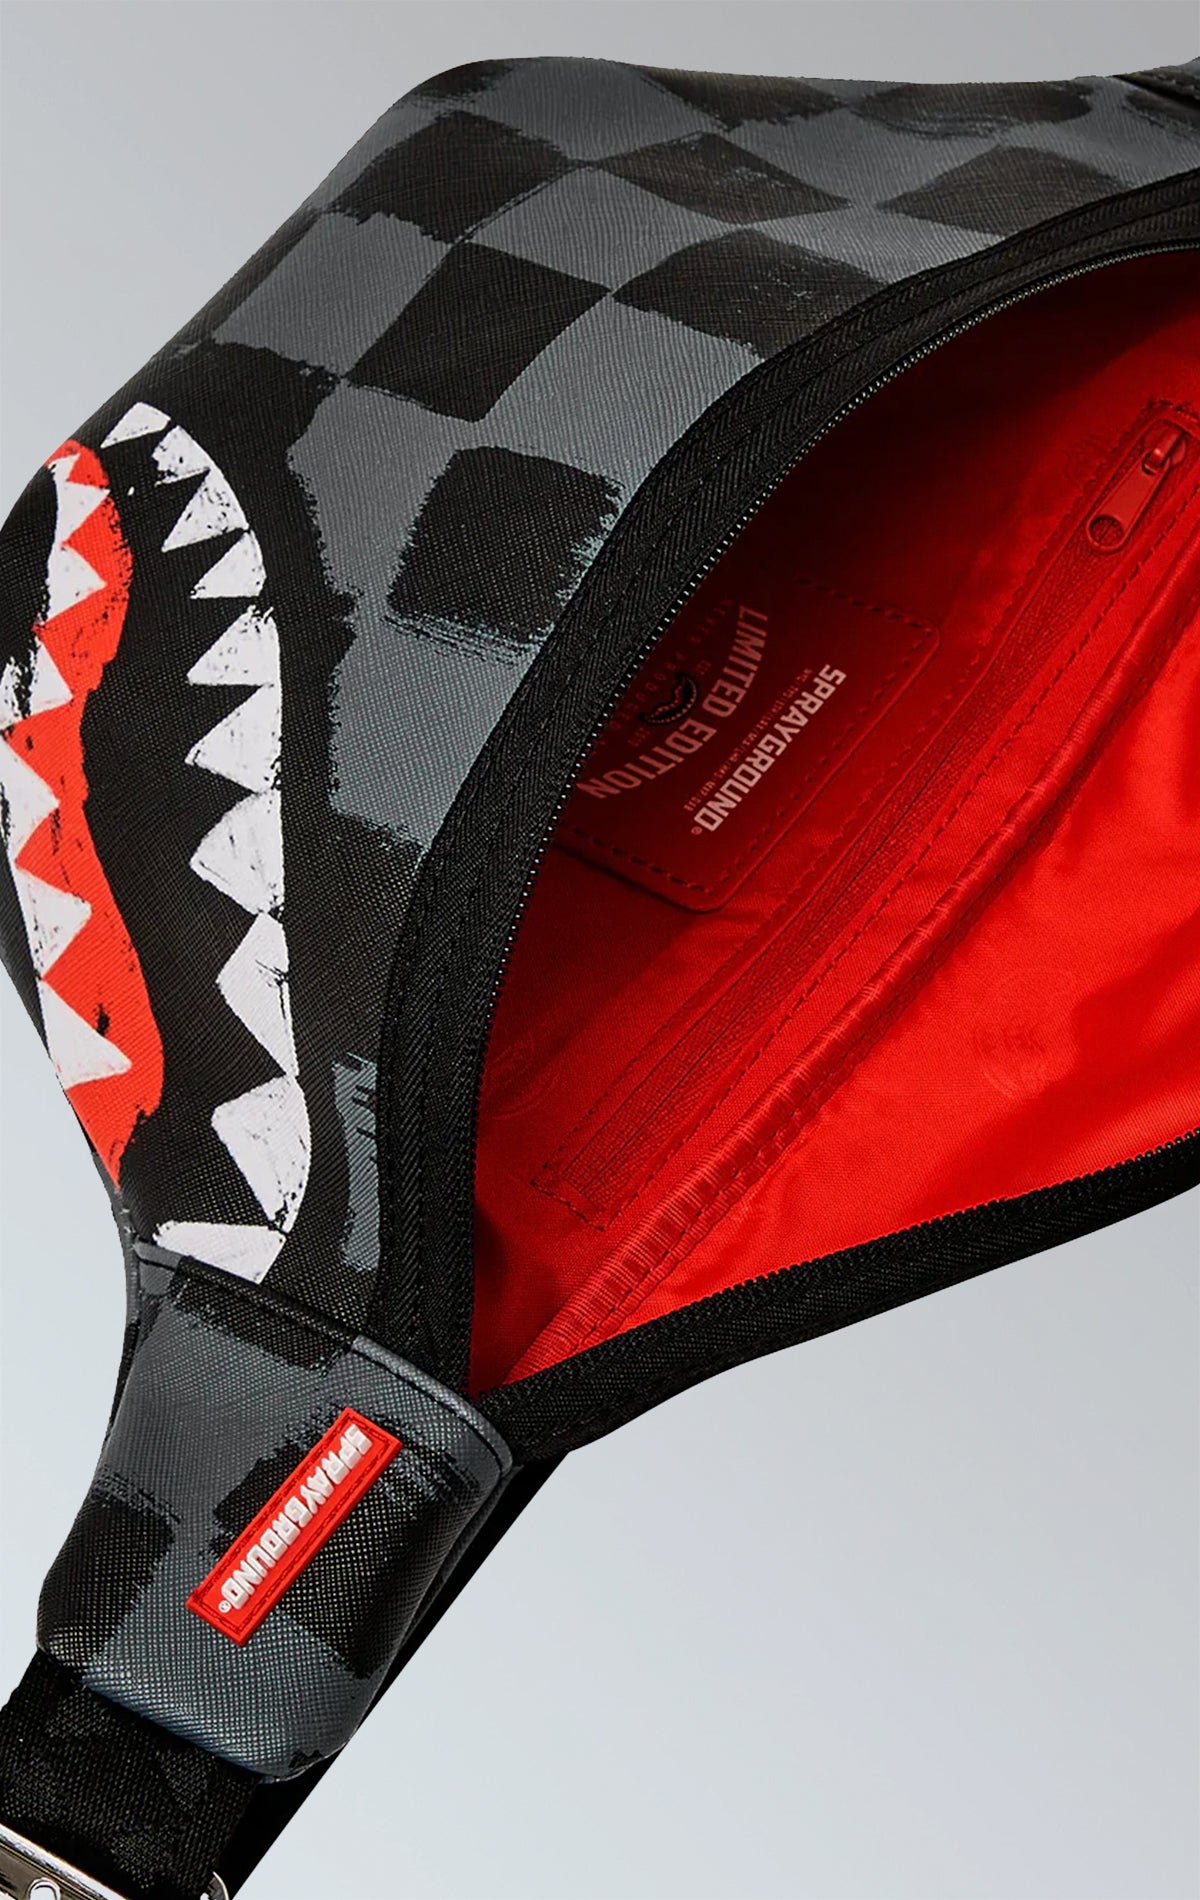 Sprayground crossbody waist bag with a Sharks in Paris design, featuring an adjustable double-sided VSM strap, a red zippered pocket with metal buckle hardware, and durable water-resistant vegan leather construction.